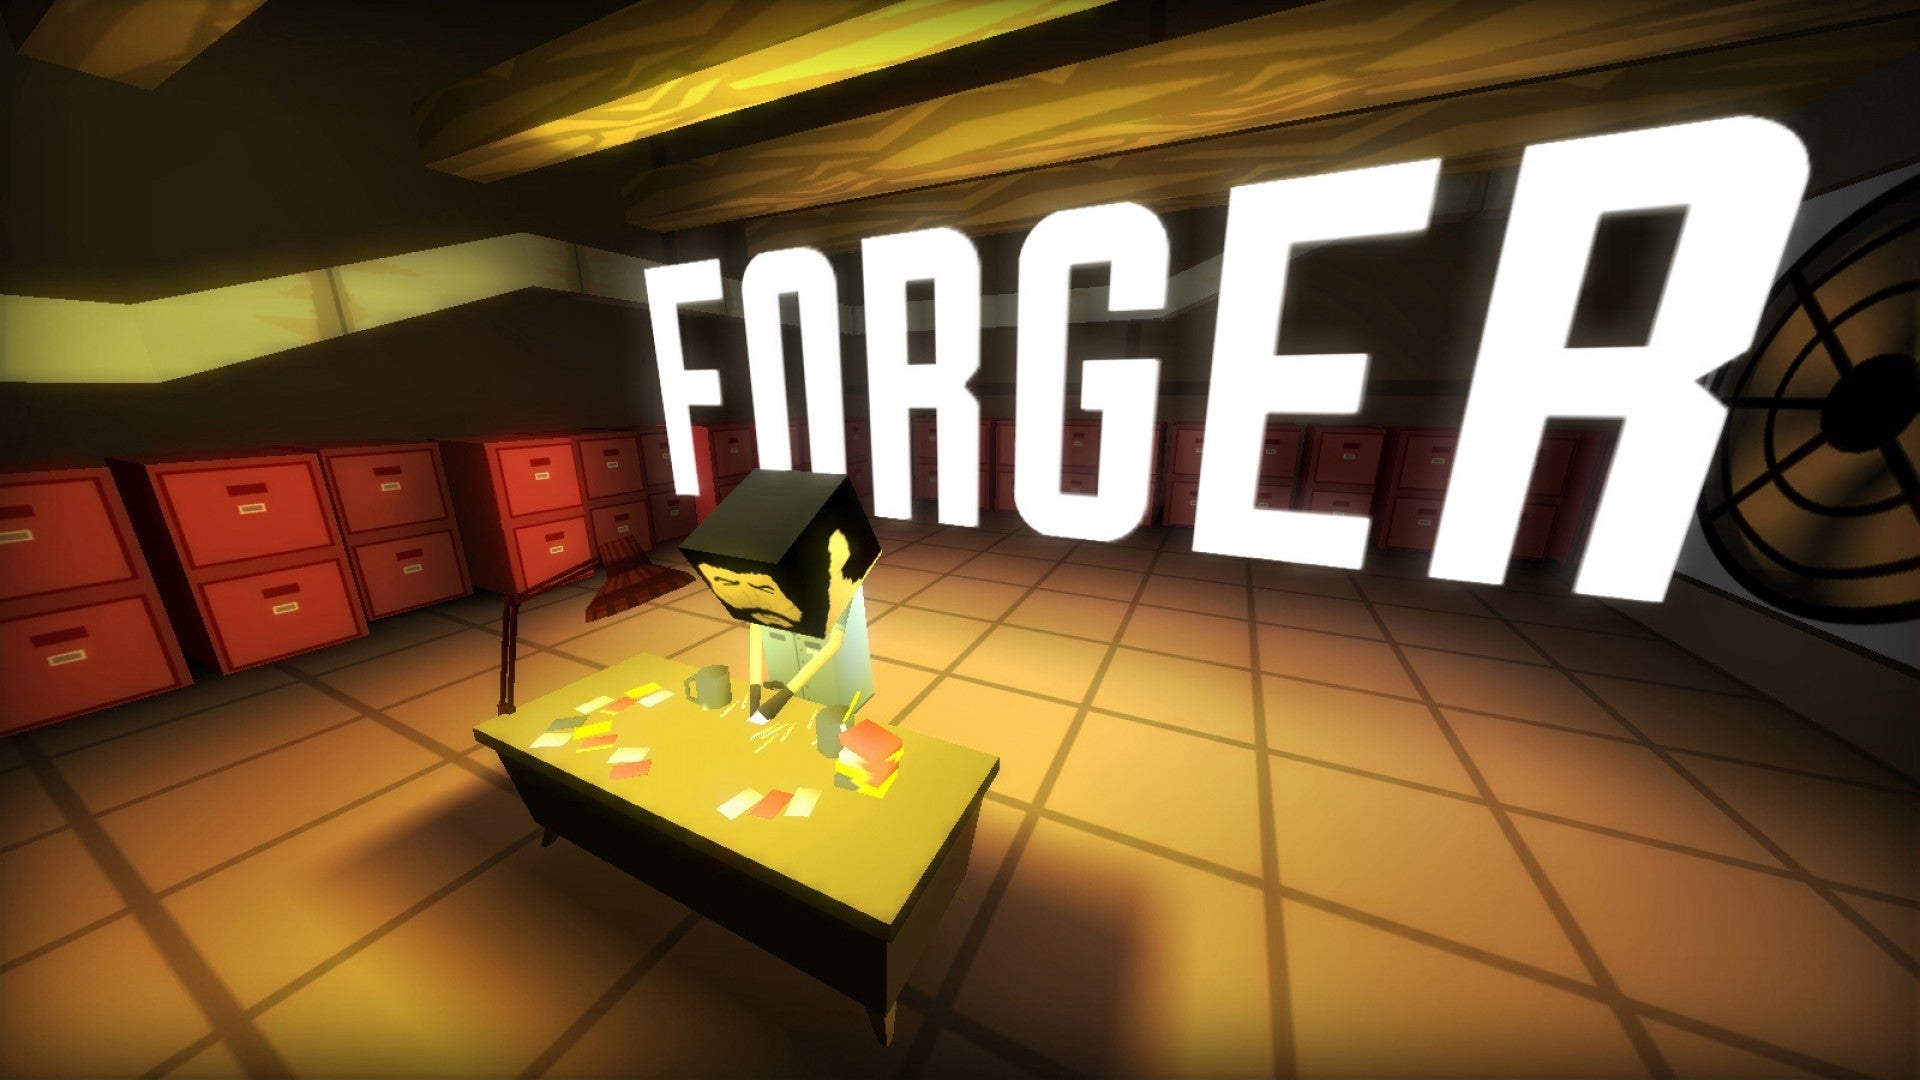 A screenshot of Thirty Flights Of Loving showing a bearded, blocheaded man at a table with the word FORGER written behind him in giant block capitals.